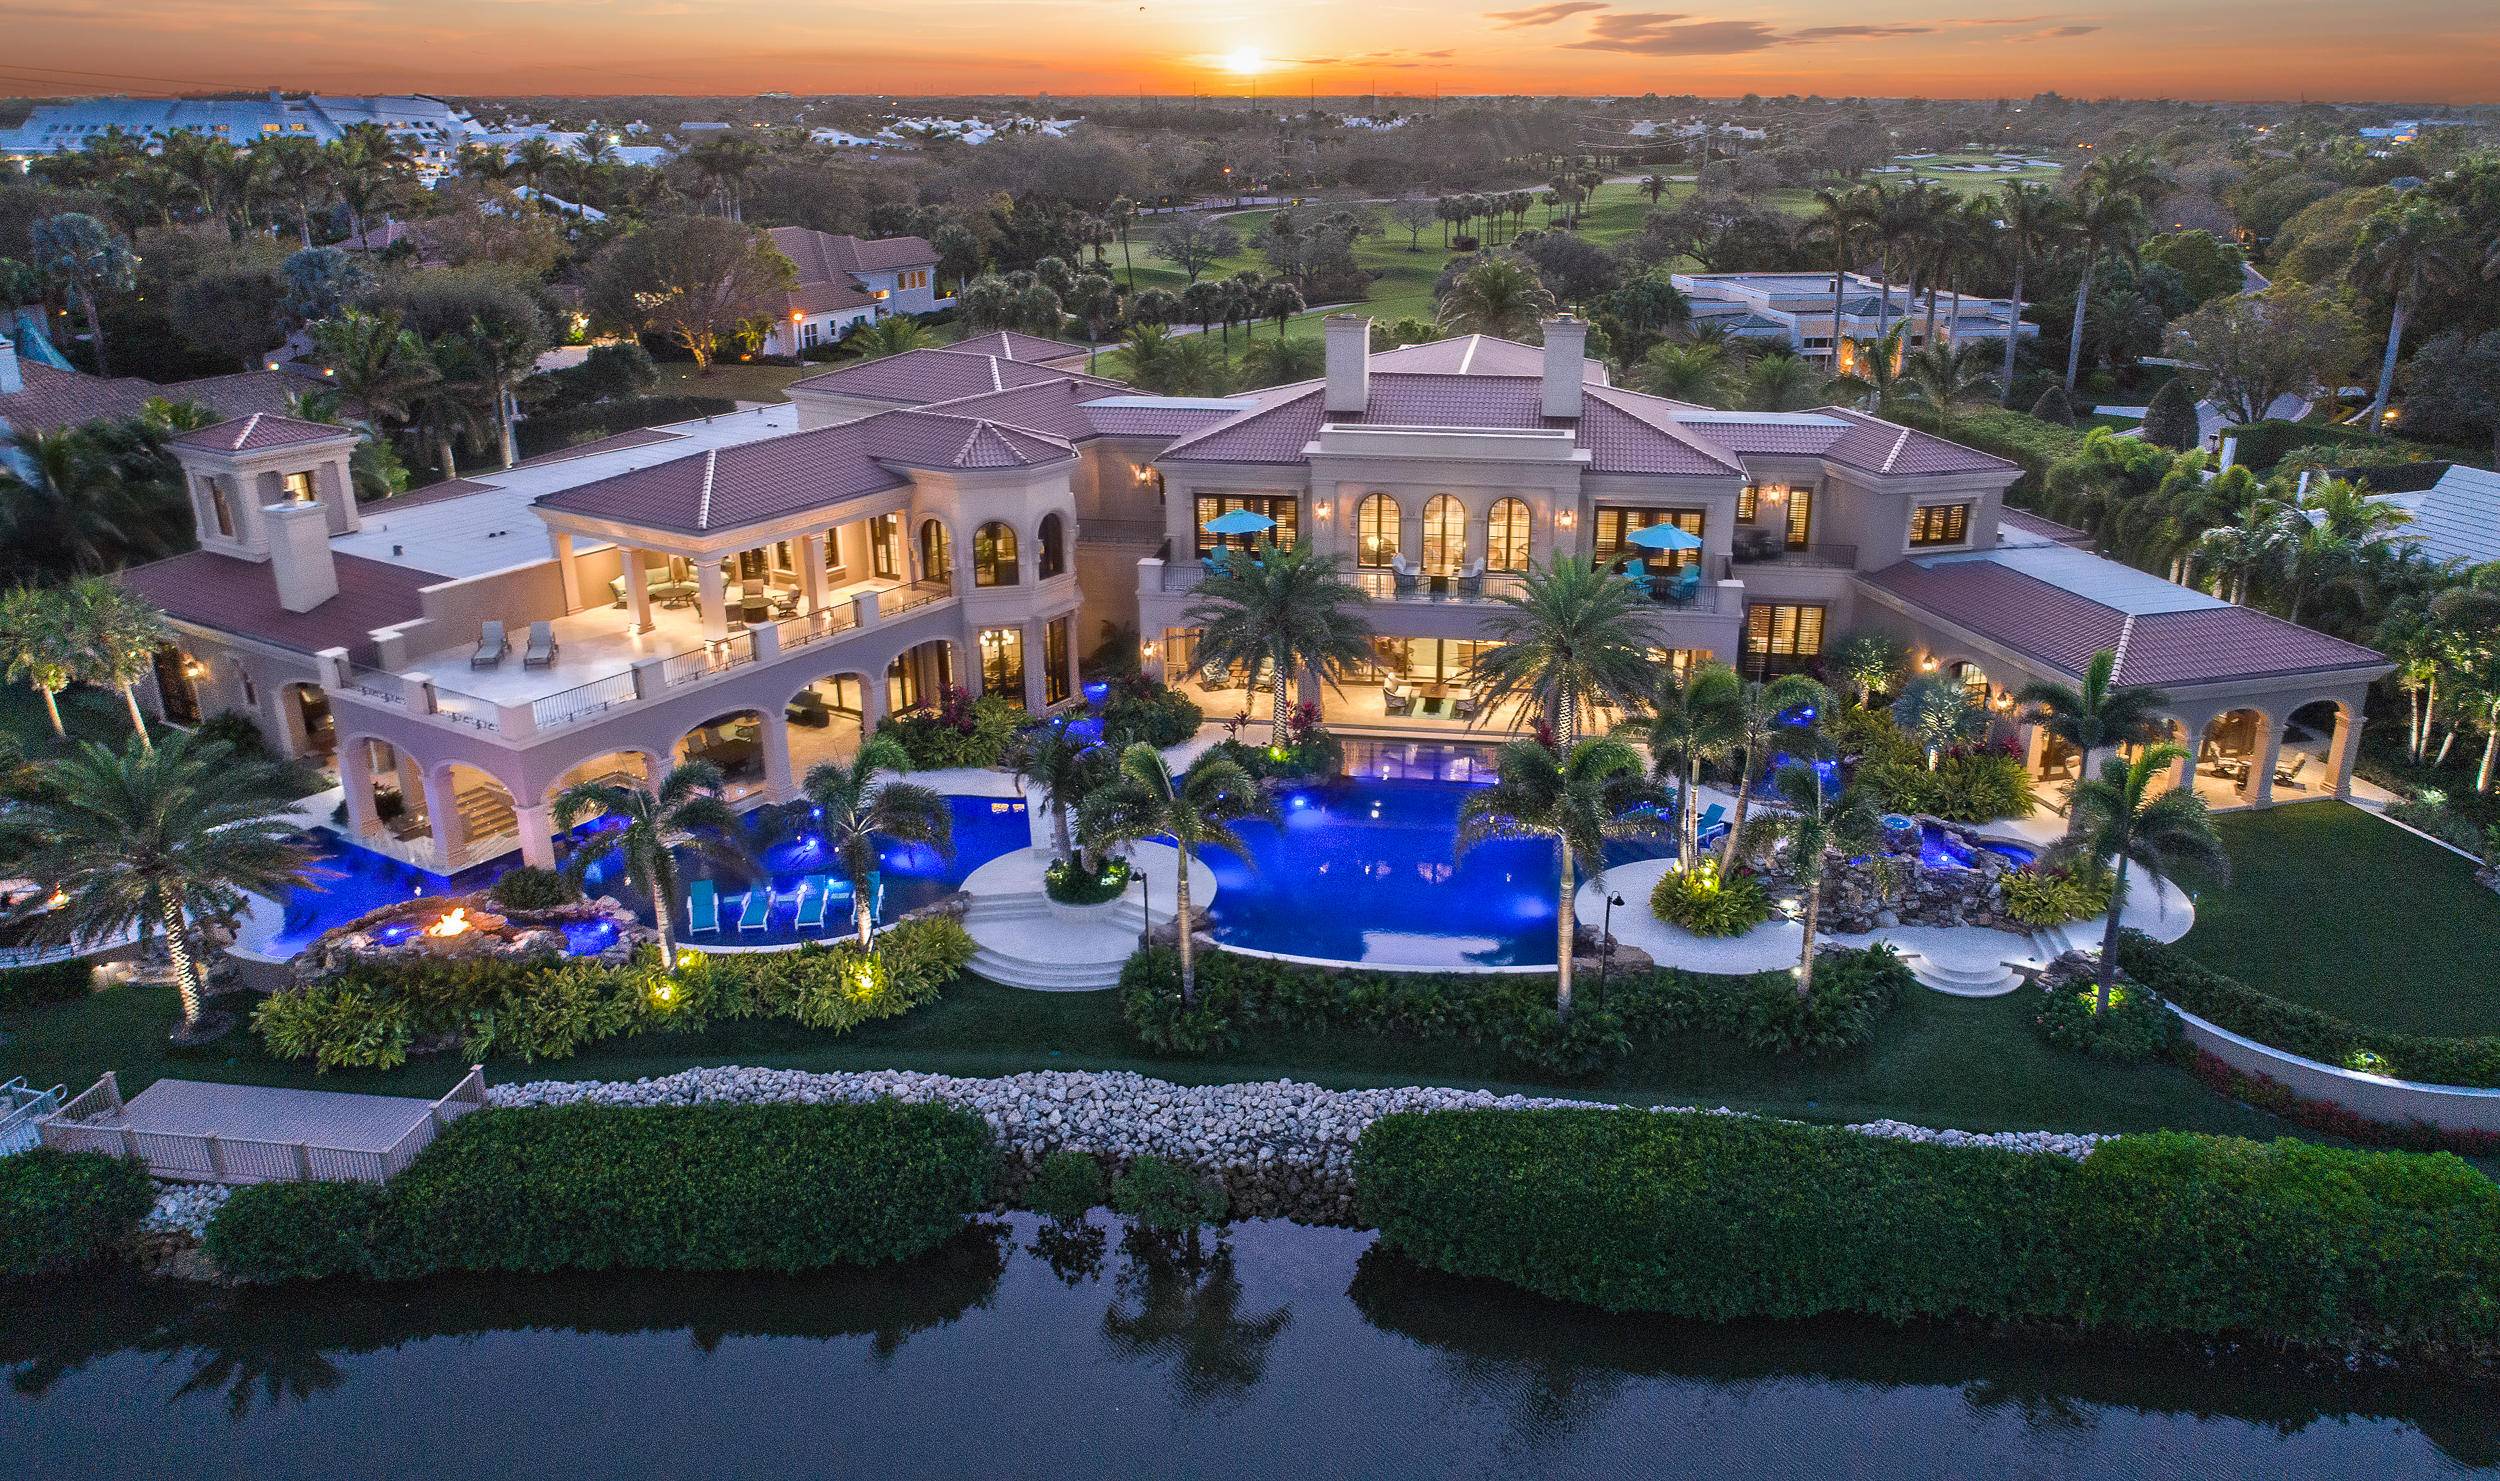 Paradise Found Masterpiece Built by Turtle Beach Construction.